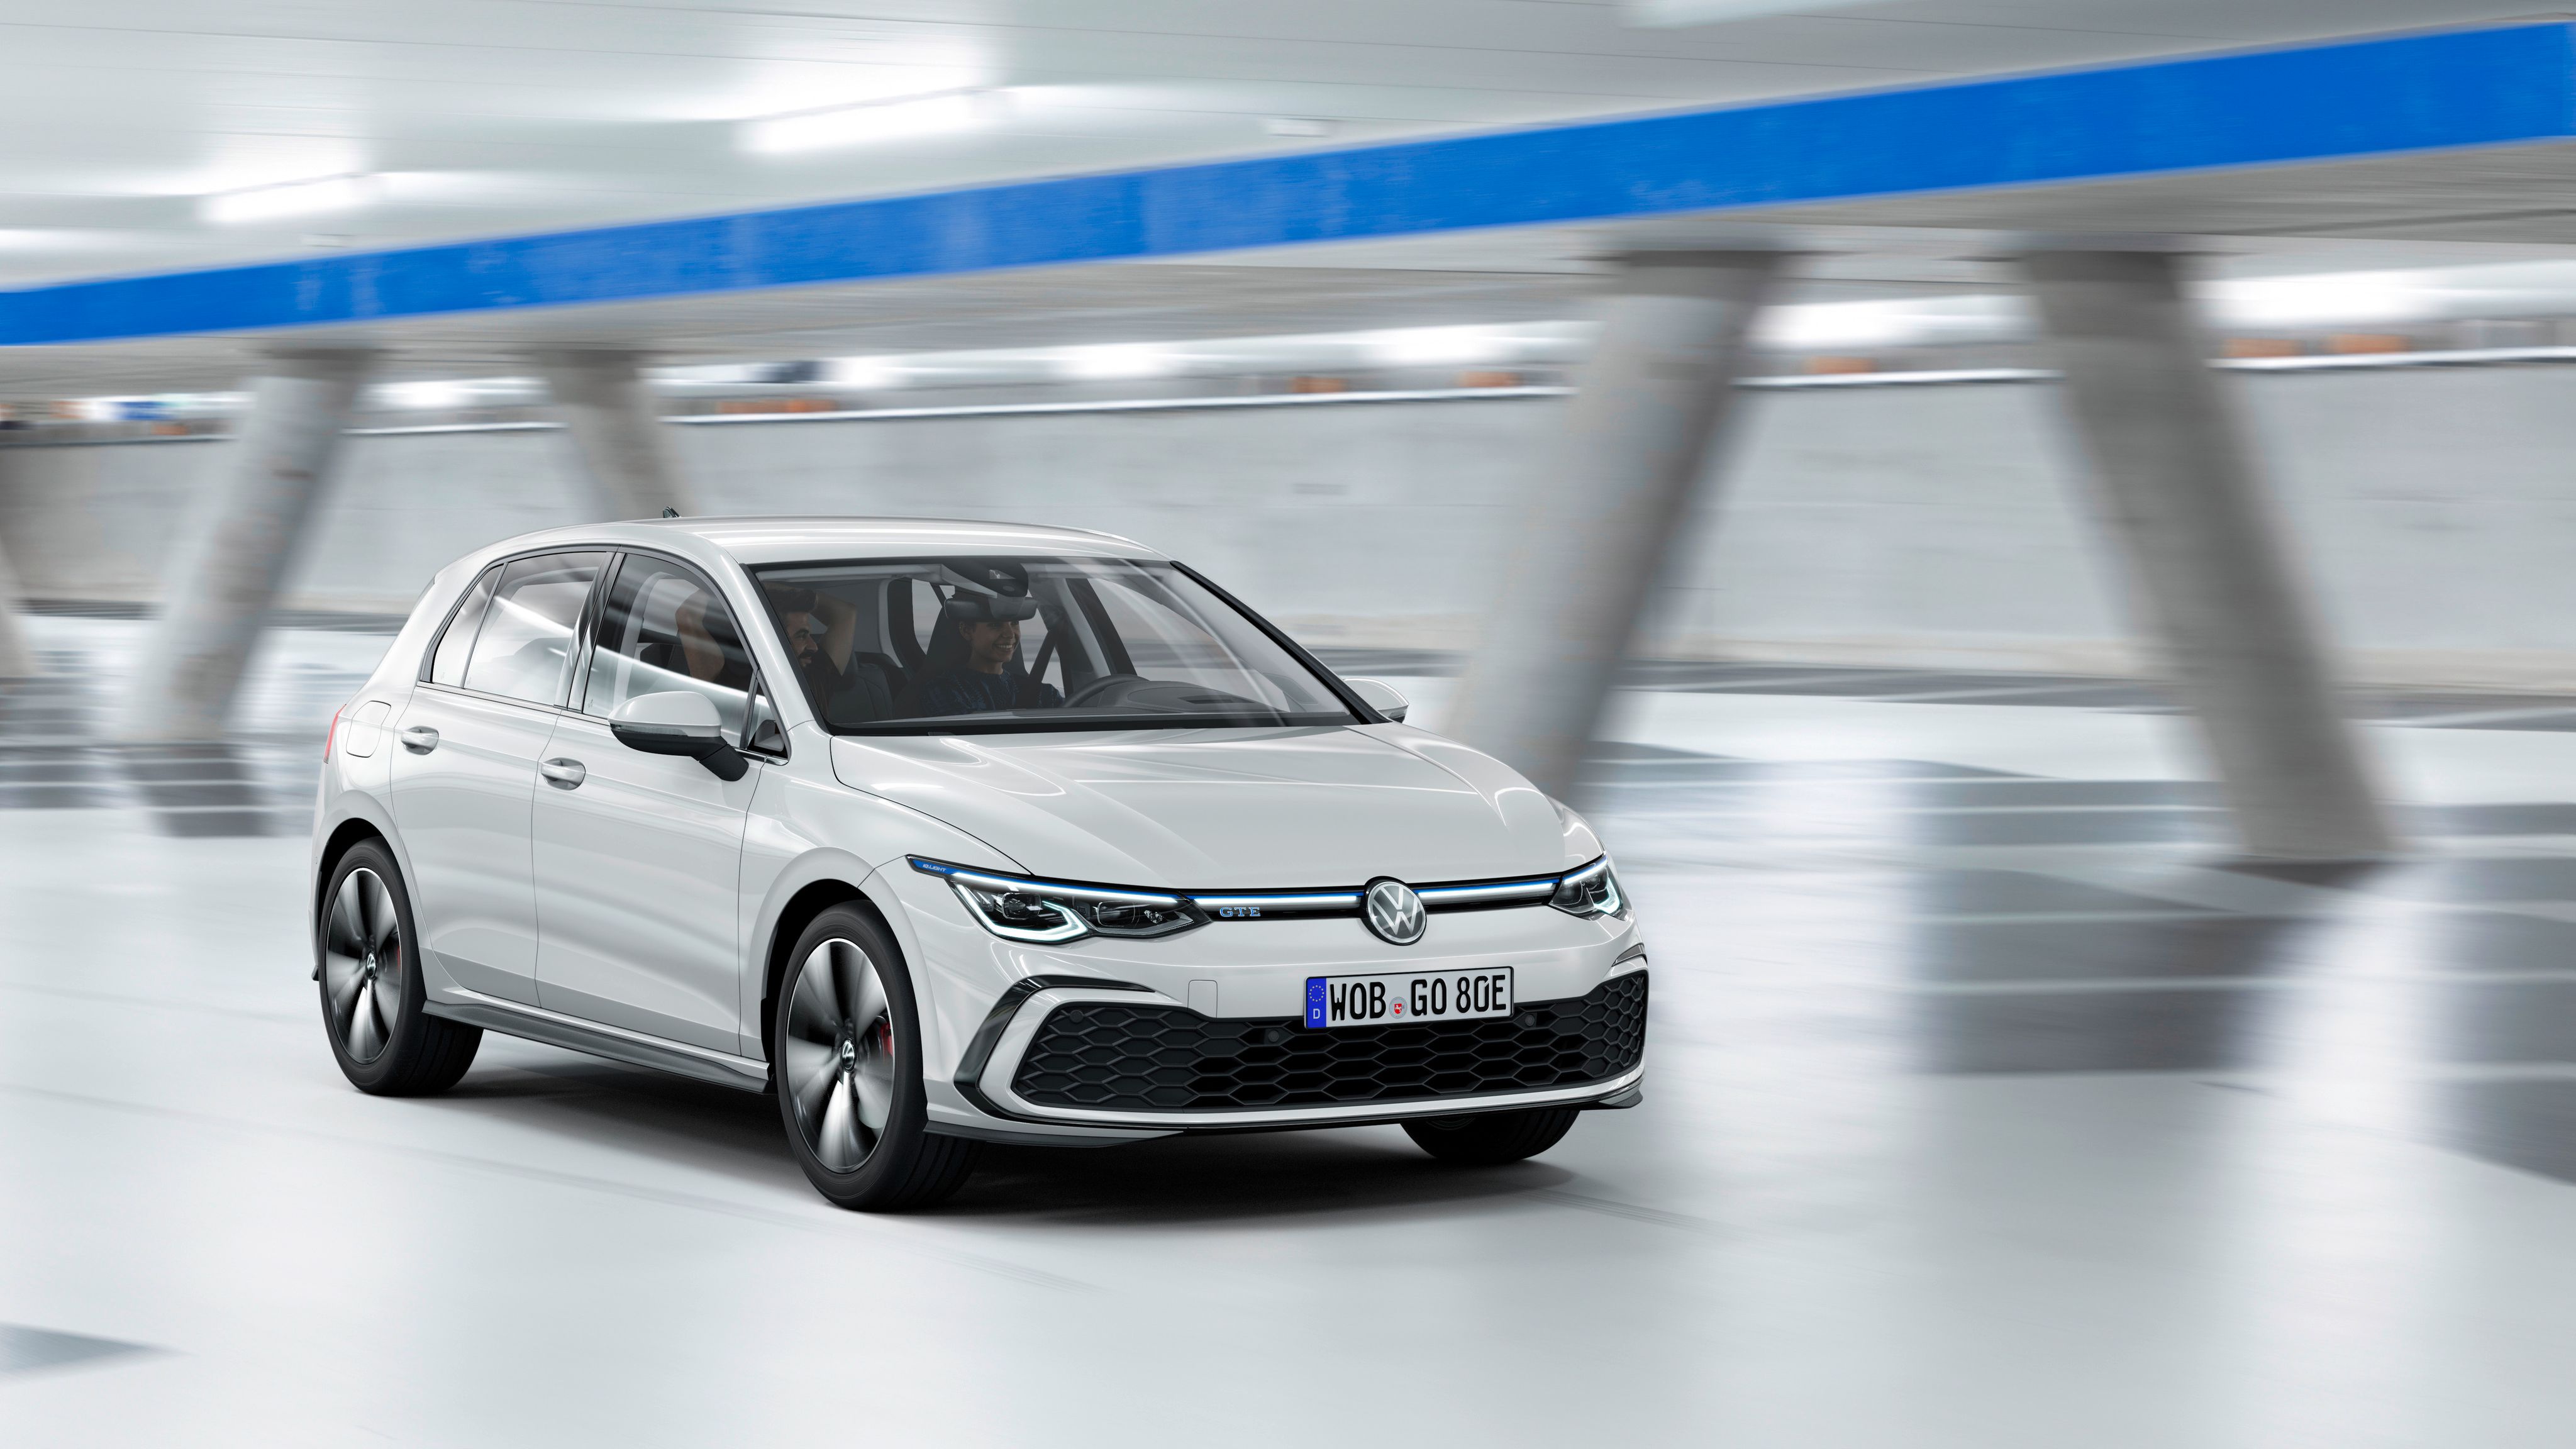 2020 Holy Electric Moly, the 2020 Volkswagen Golf Mk8 Hybrid Is More Powerful Than the GTI